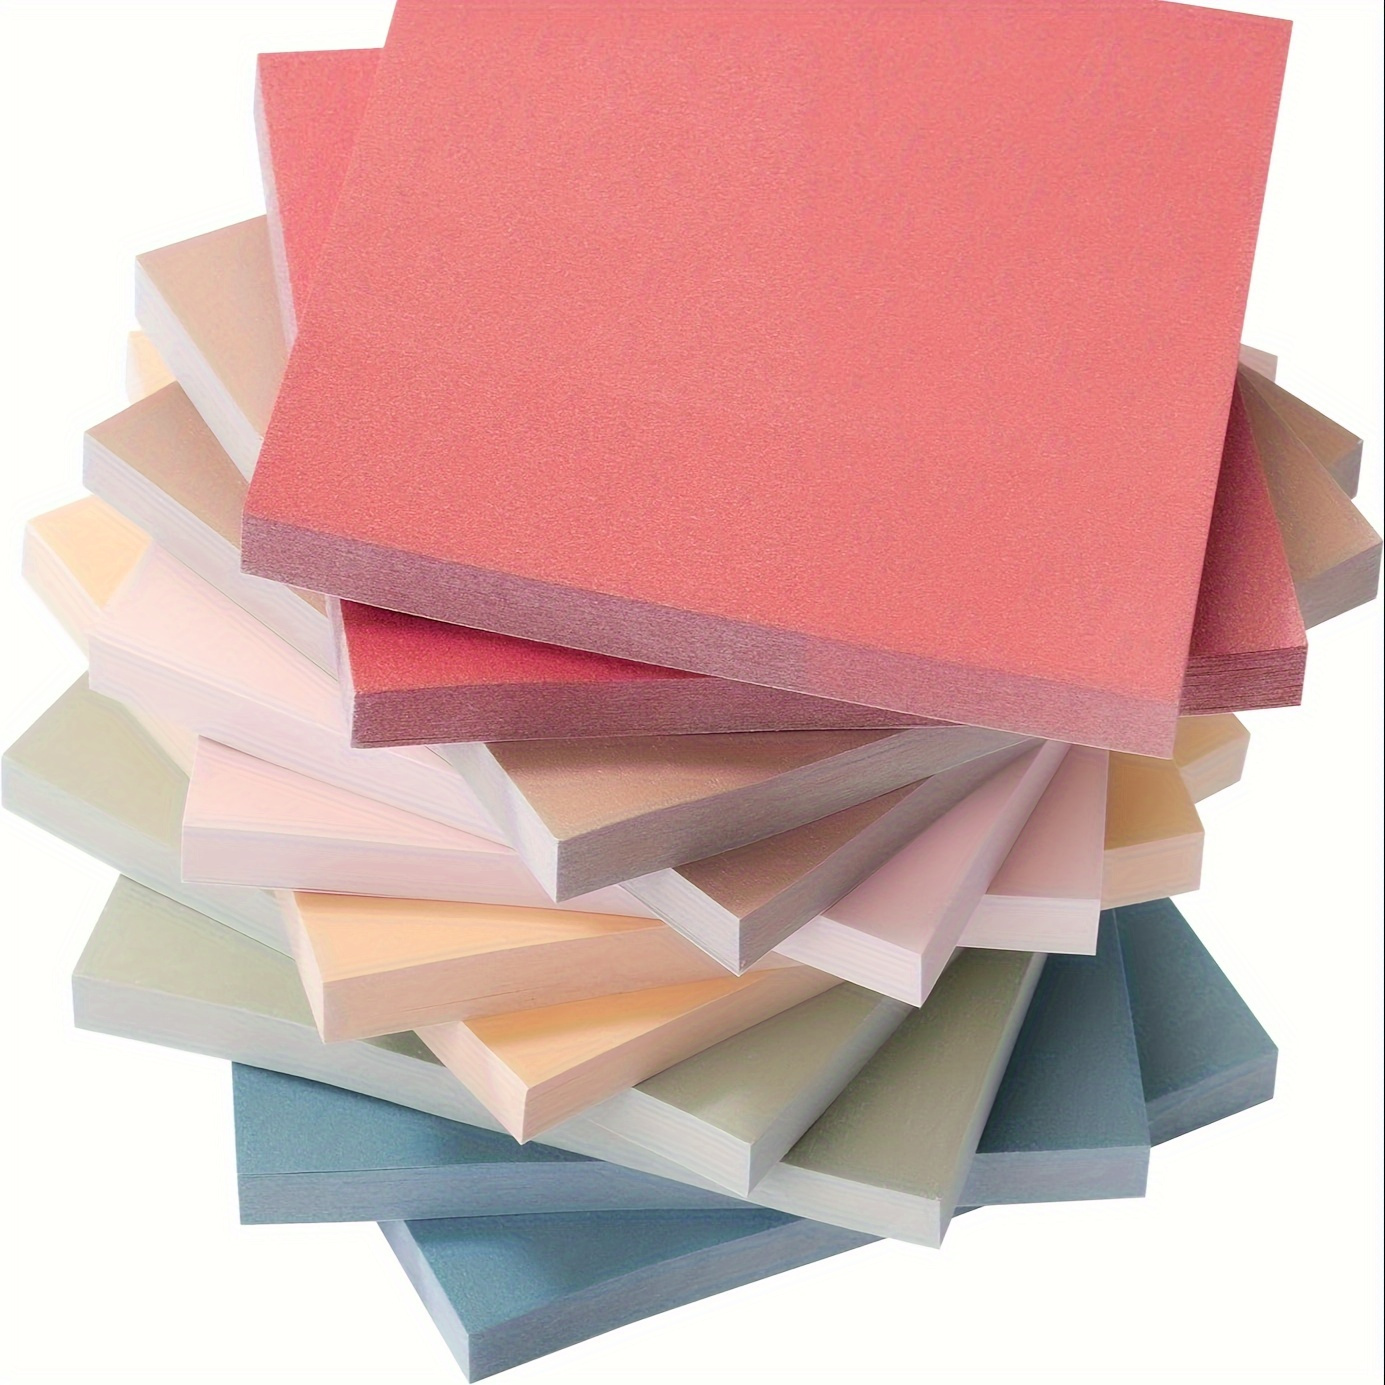 

Vintage-inspired Sticky Notes Set - 6 Pads, 300 Sheets, Assorted Colors, 3x3 Inch Adhesive Memo Pads For Home & Office Use